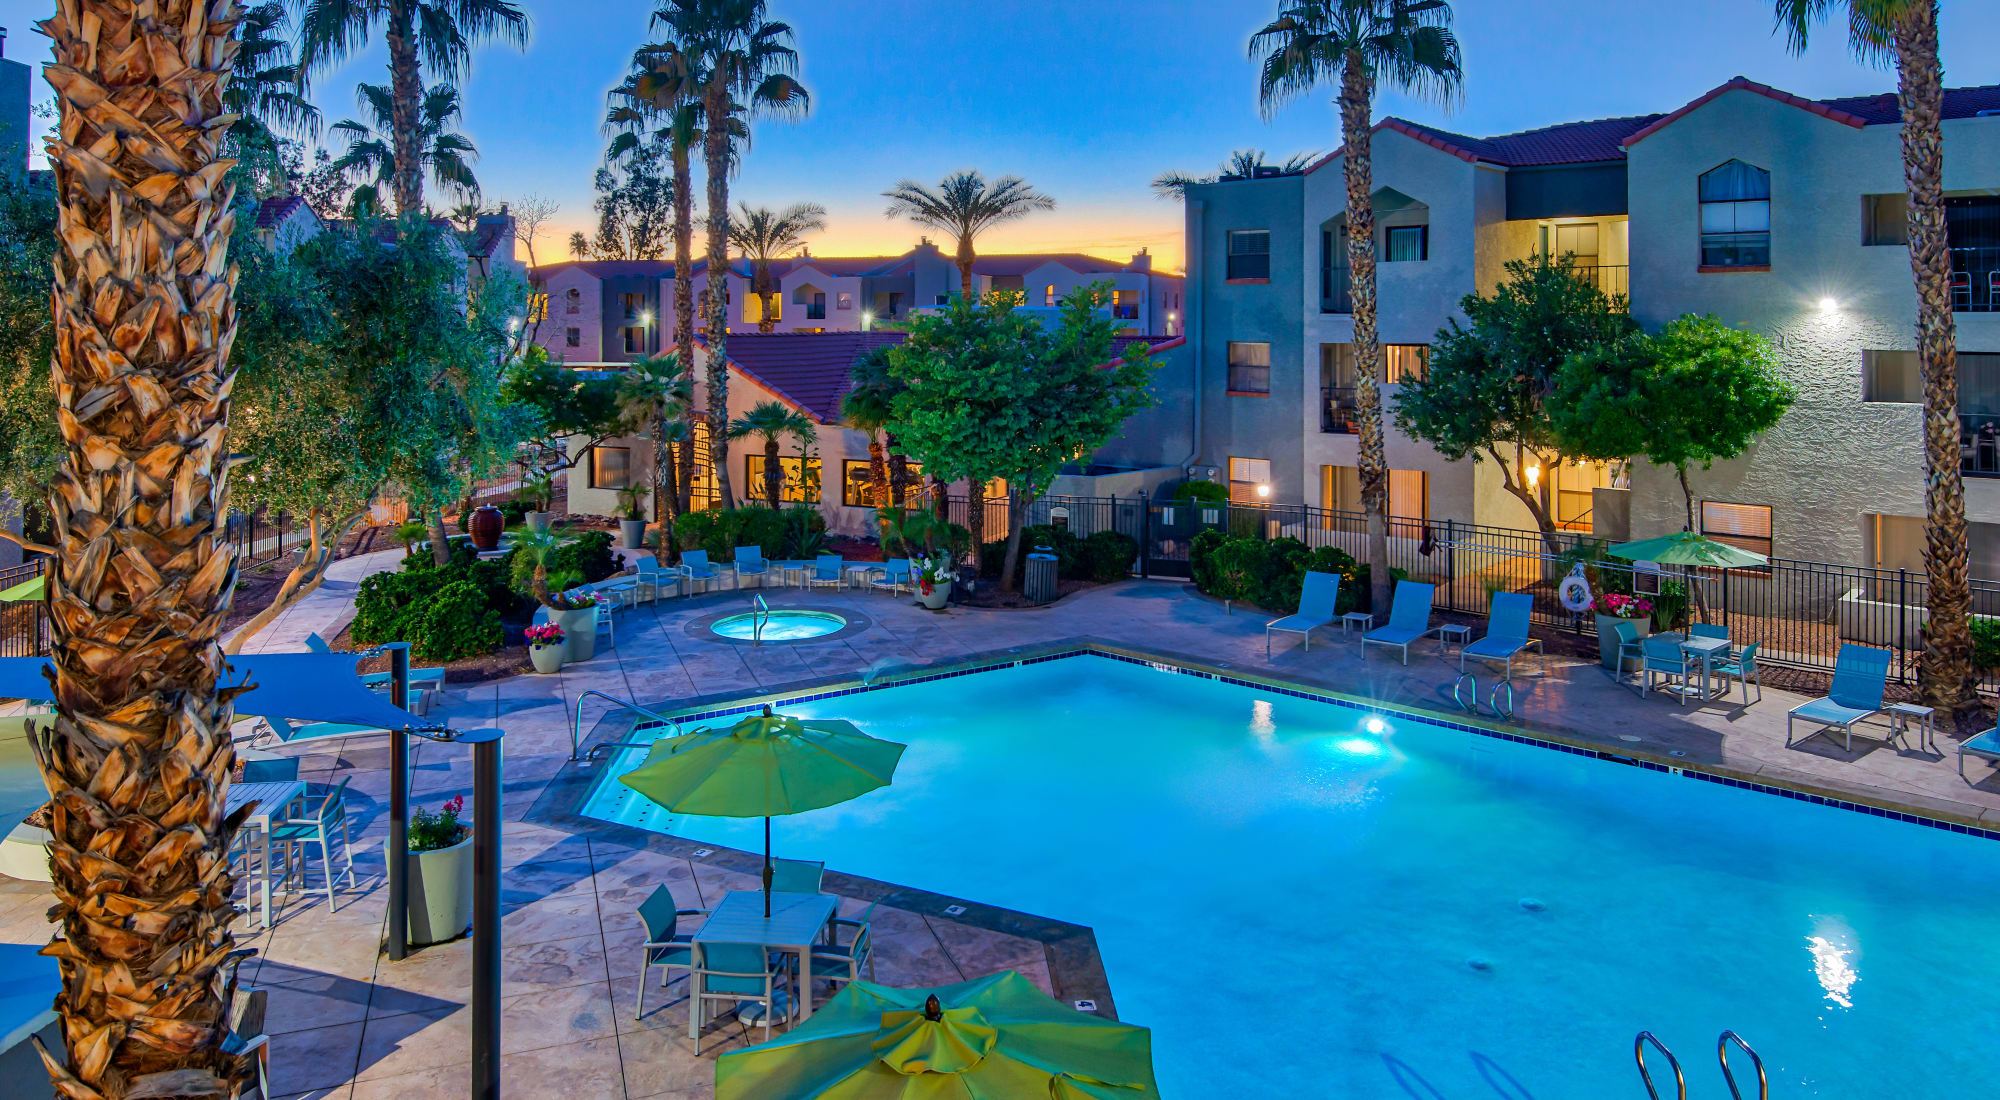 Greenspoint at Paradise Valley apartments in Phoenix, AZ